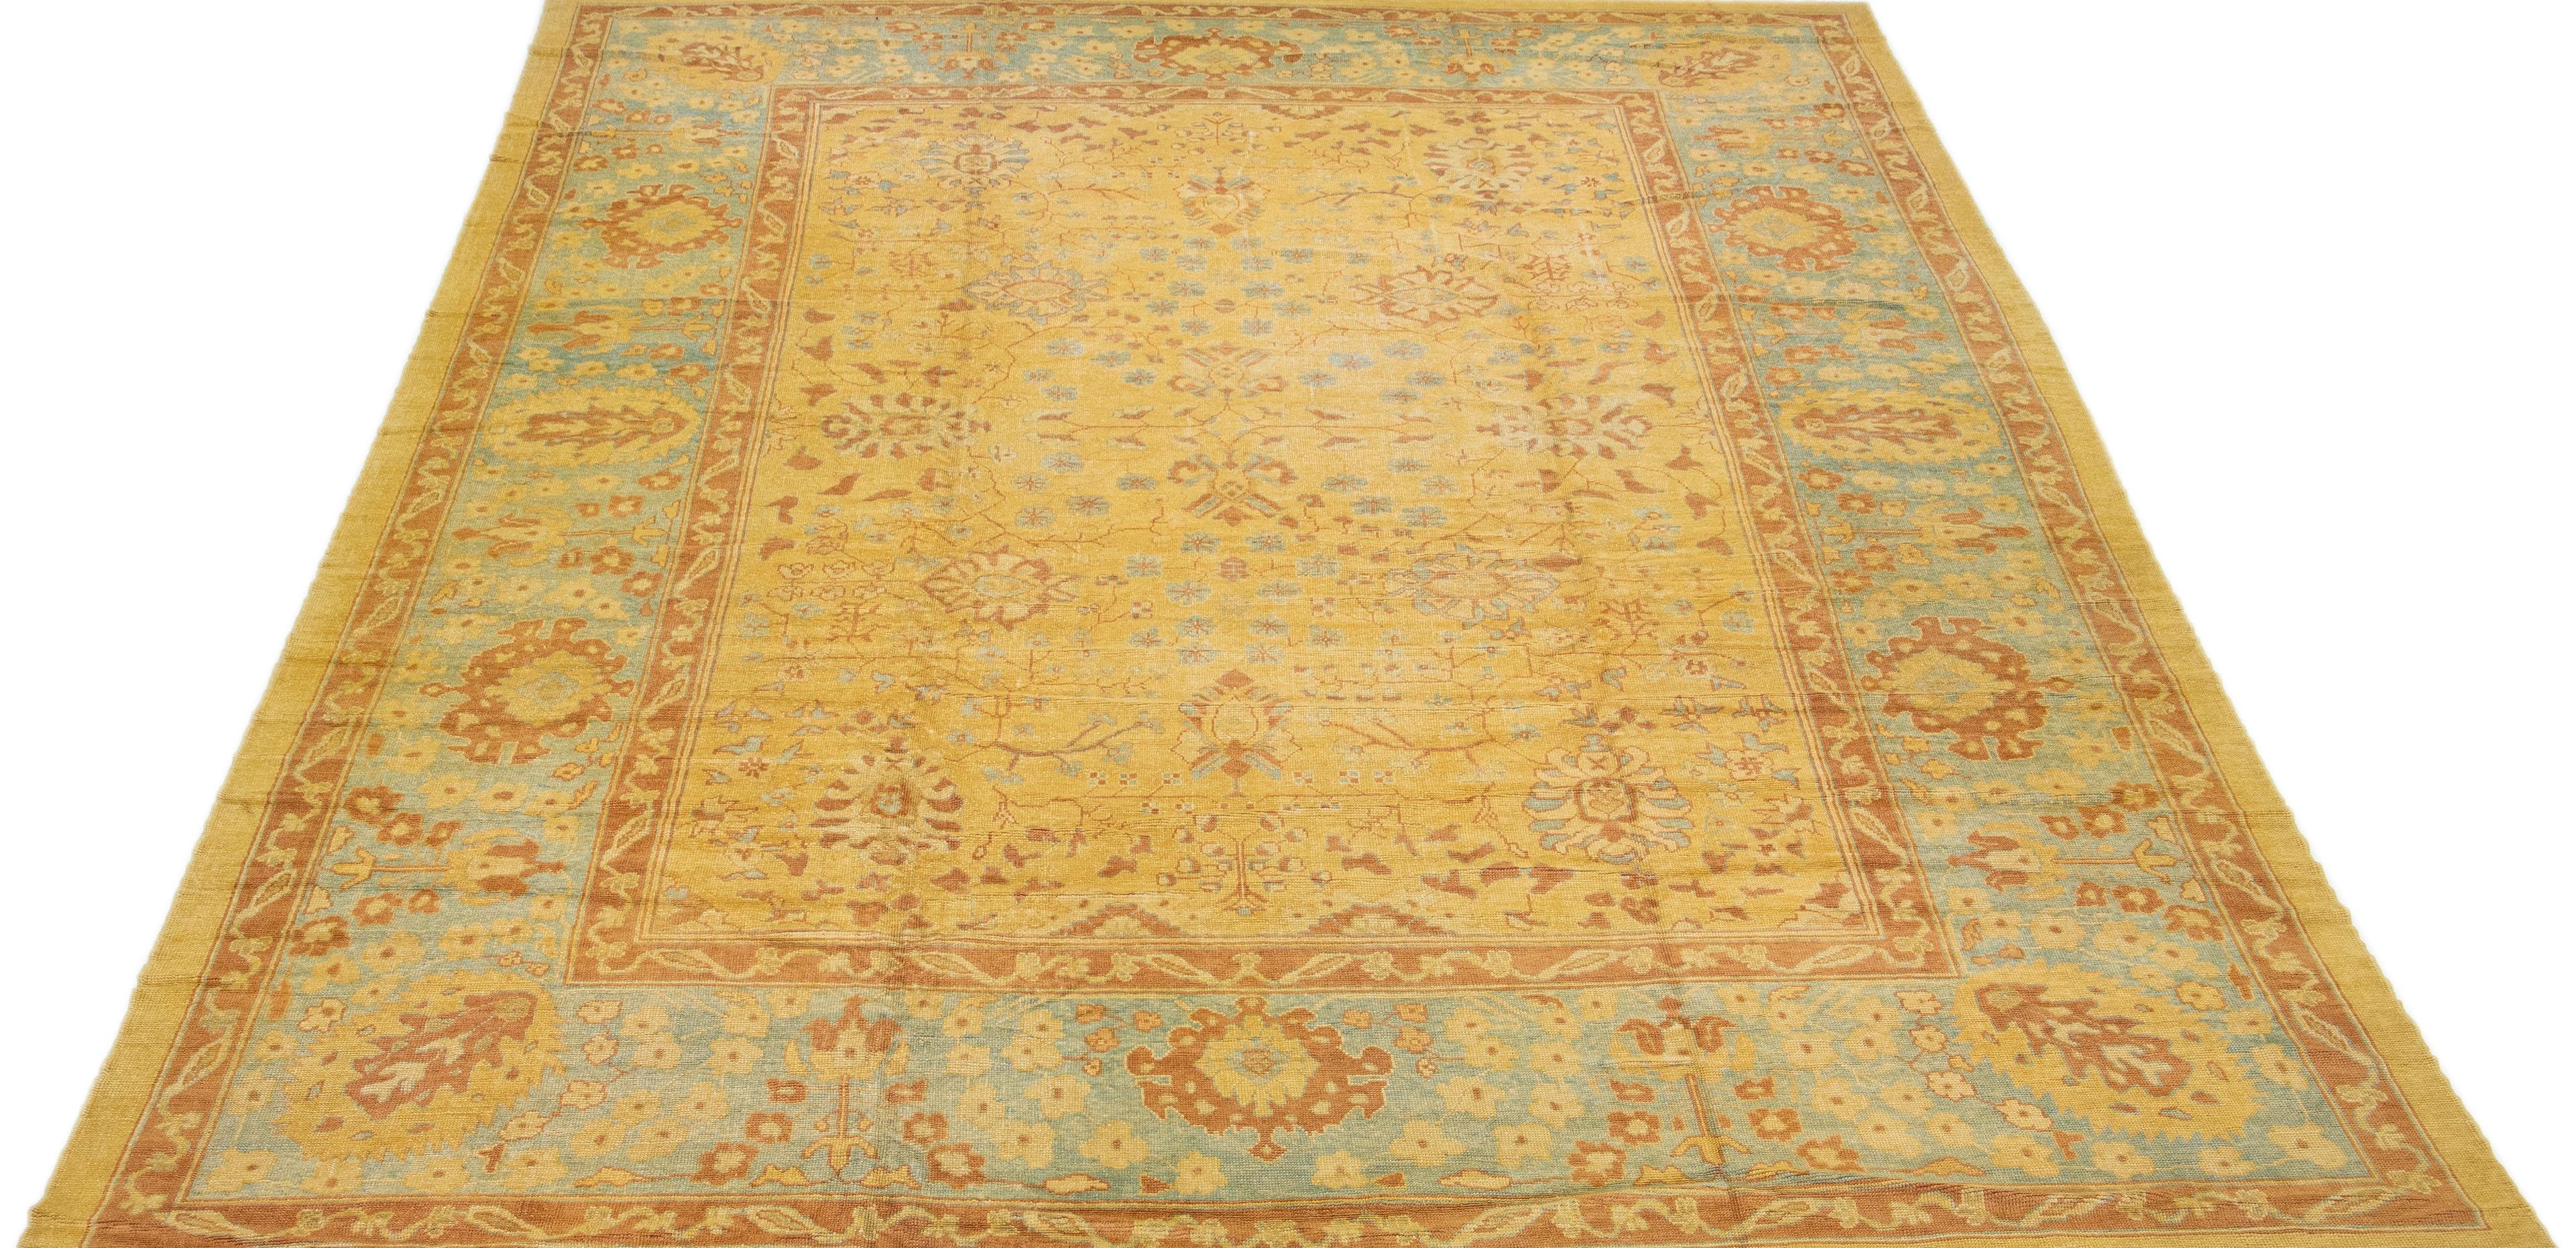 Beautiful Modern Turkish hand-knotted wool rug with a goldenrod color field. This rug has a blue designed frame with accent colors of brown and beige in a gorgeous all-over geometric floral design.

This rug measures: 14'6